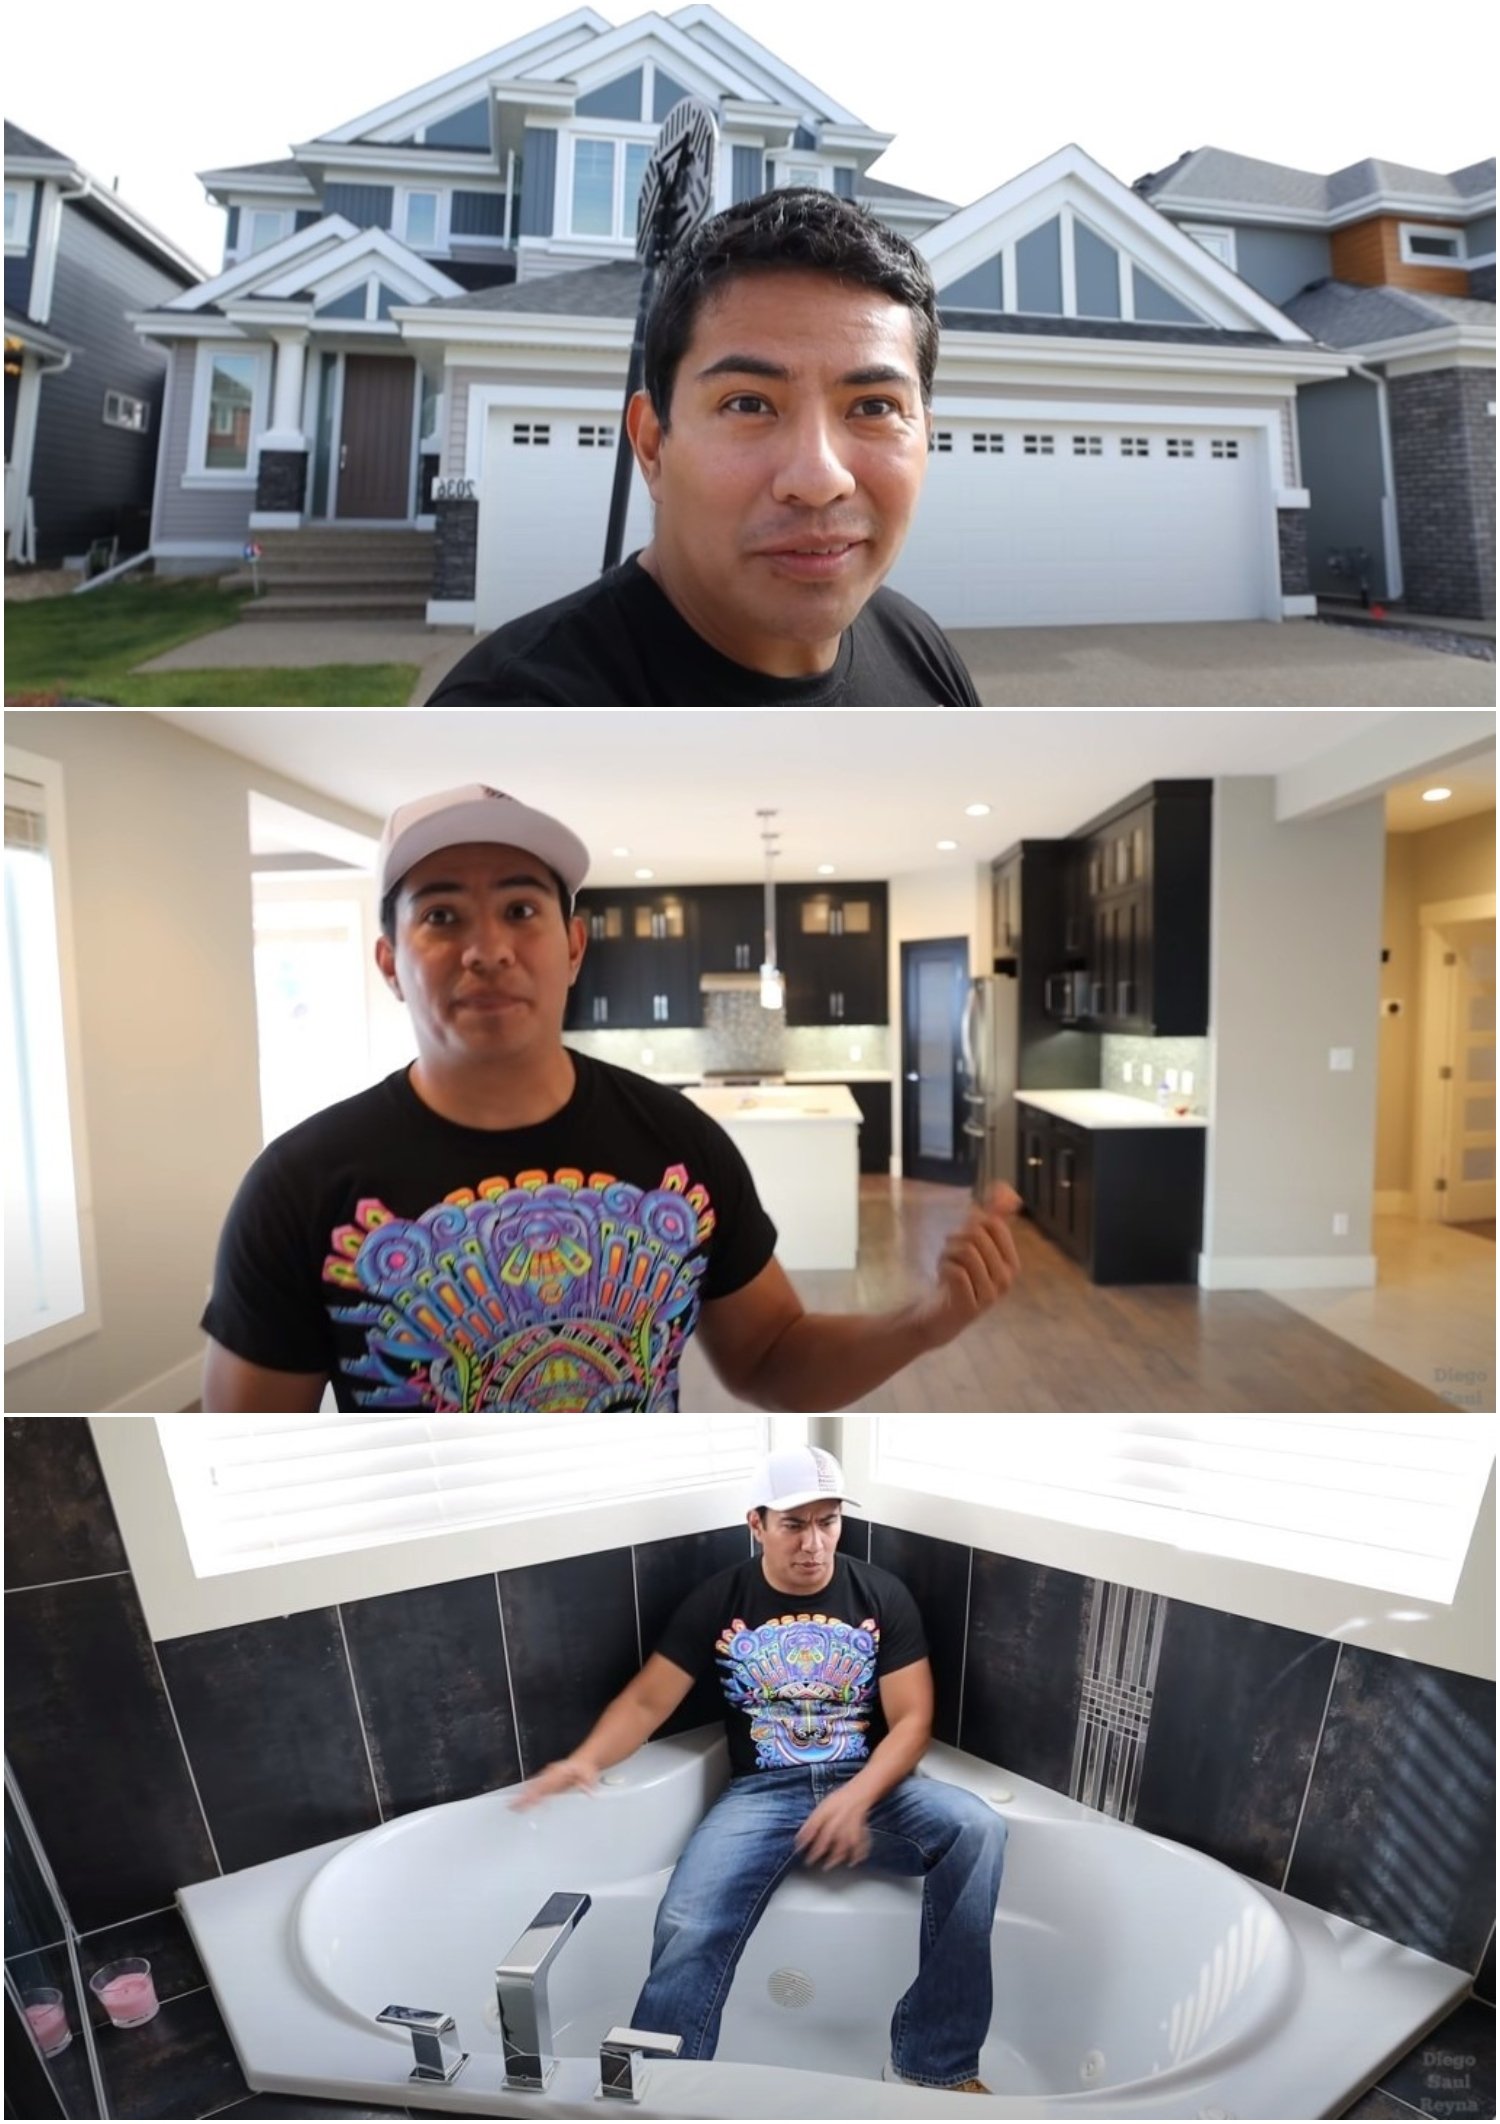 Mexican boasts the luxurious house he bought in Canada working as a bricklayer